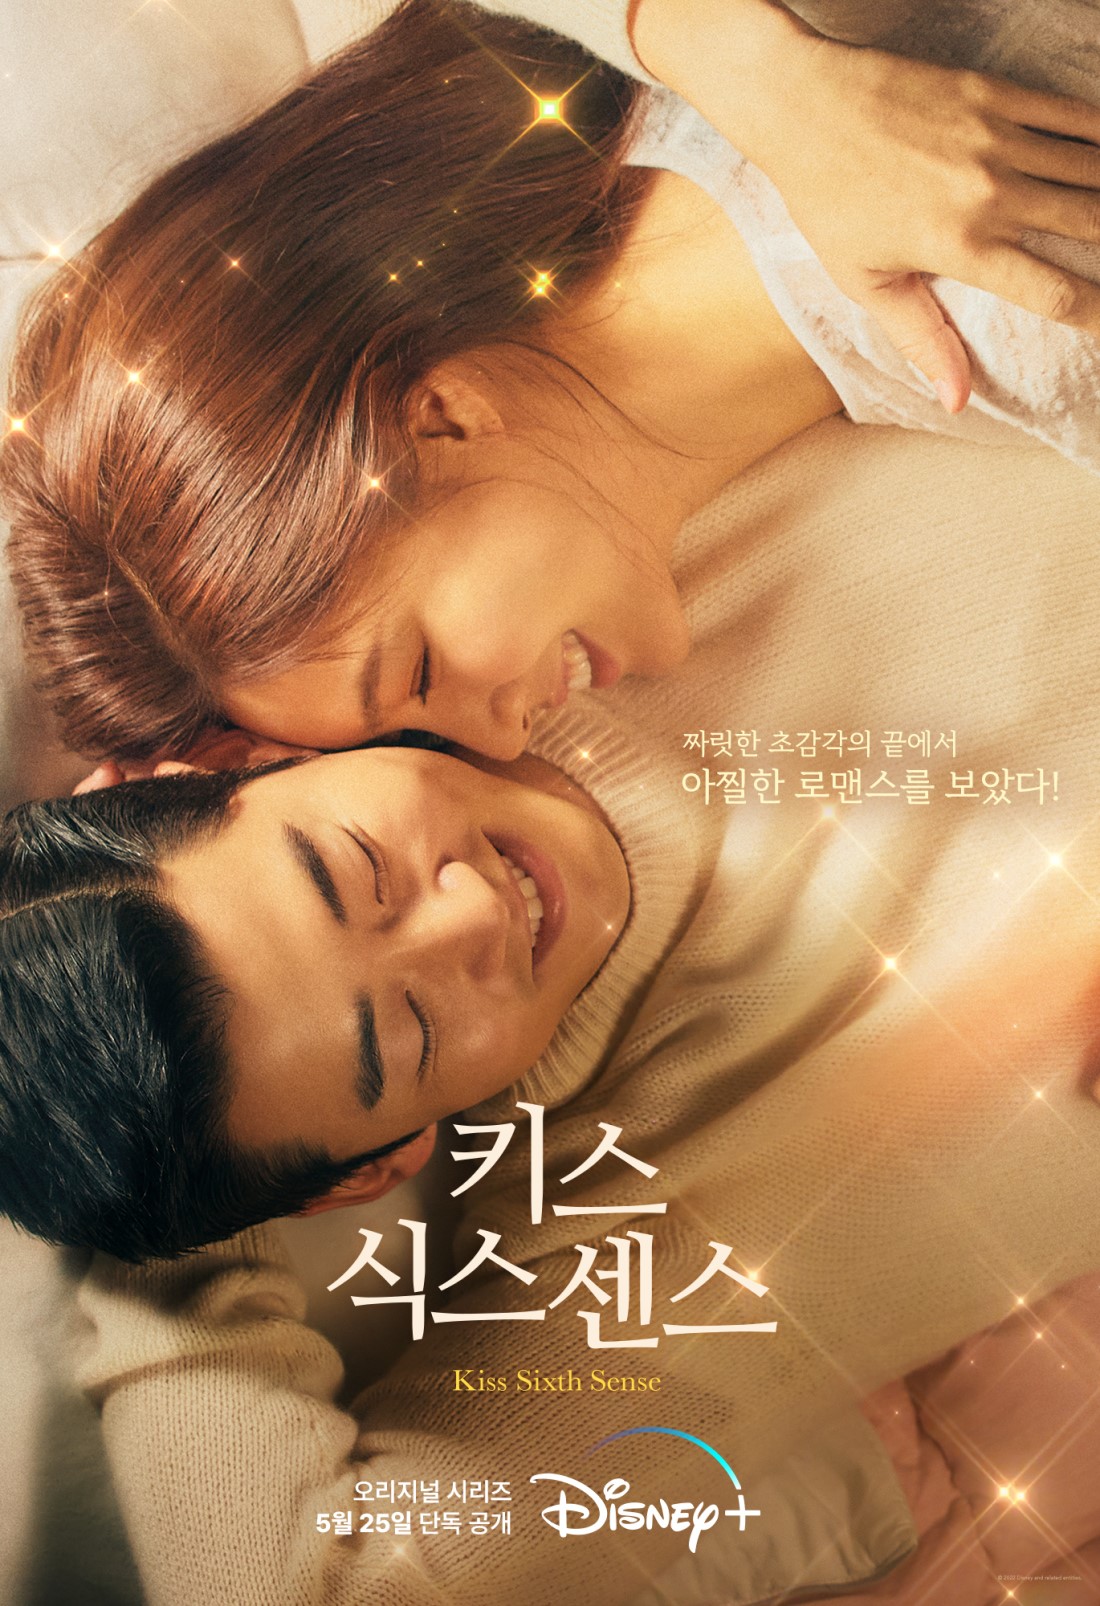 Seo Ji-hye tries to deny her future with Yoon Kye-sang in new promos for Kiss Sixth Sense